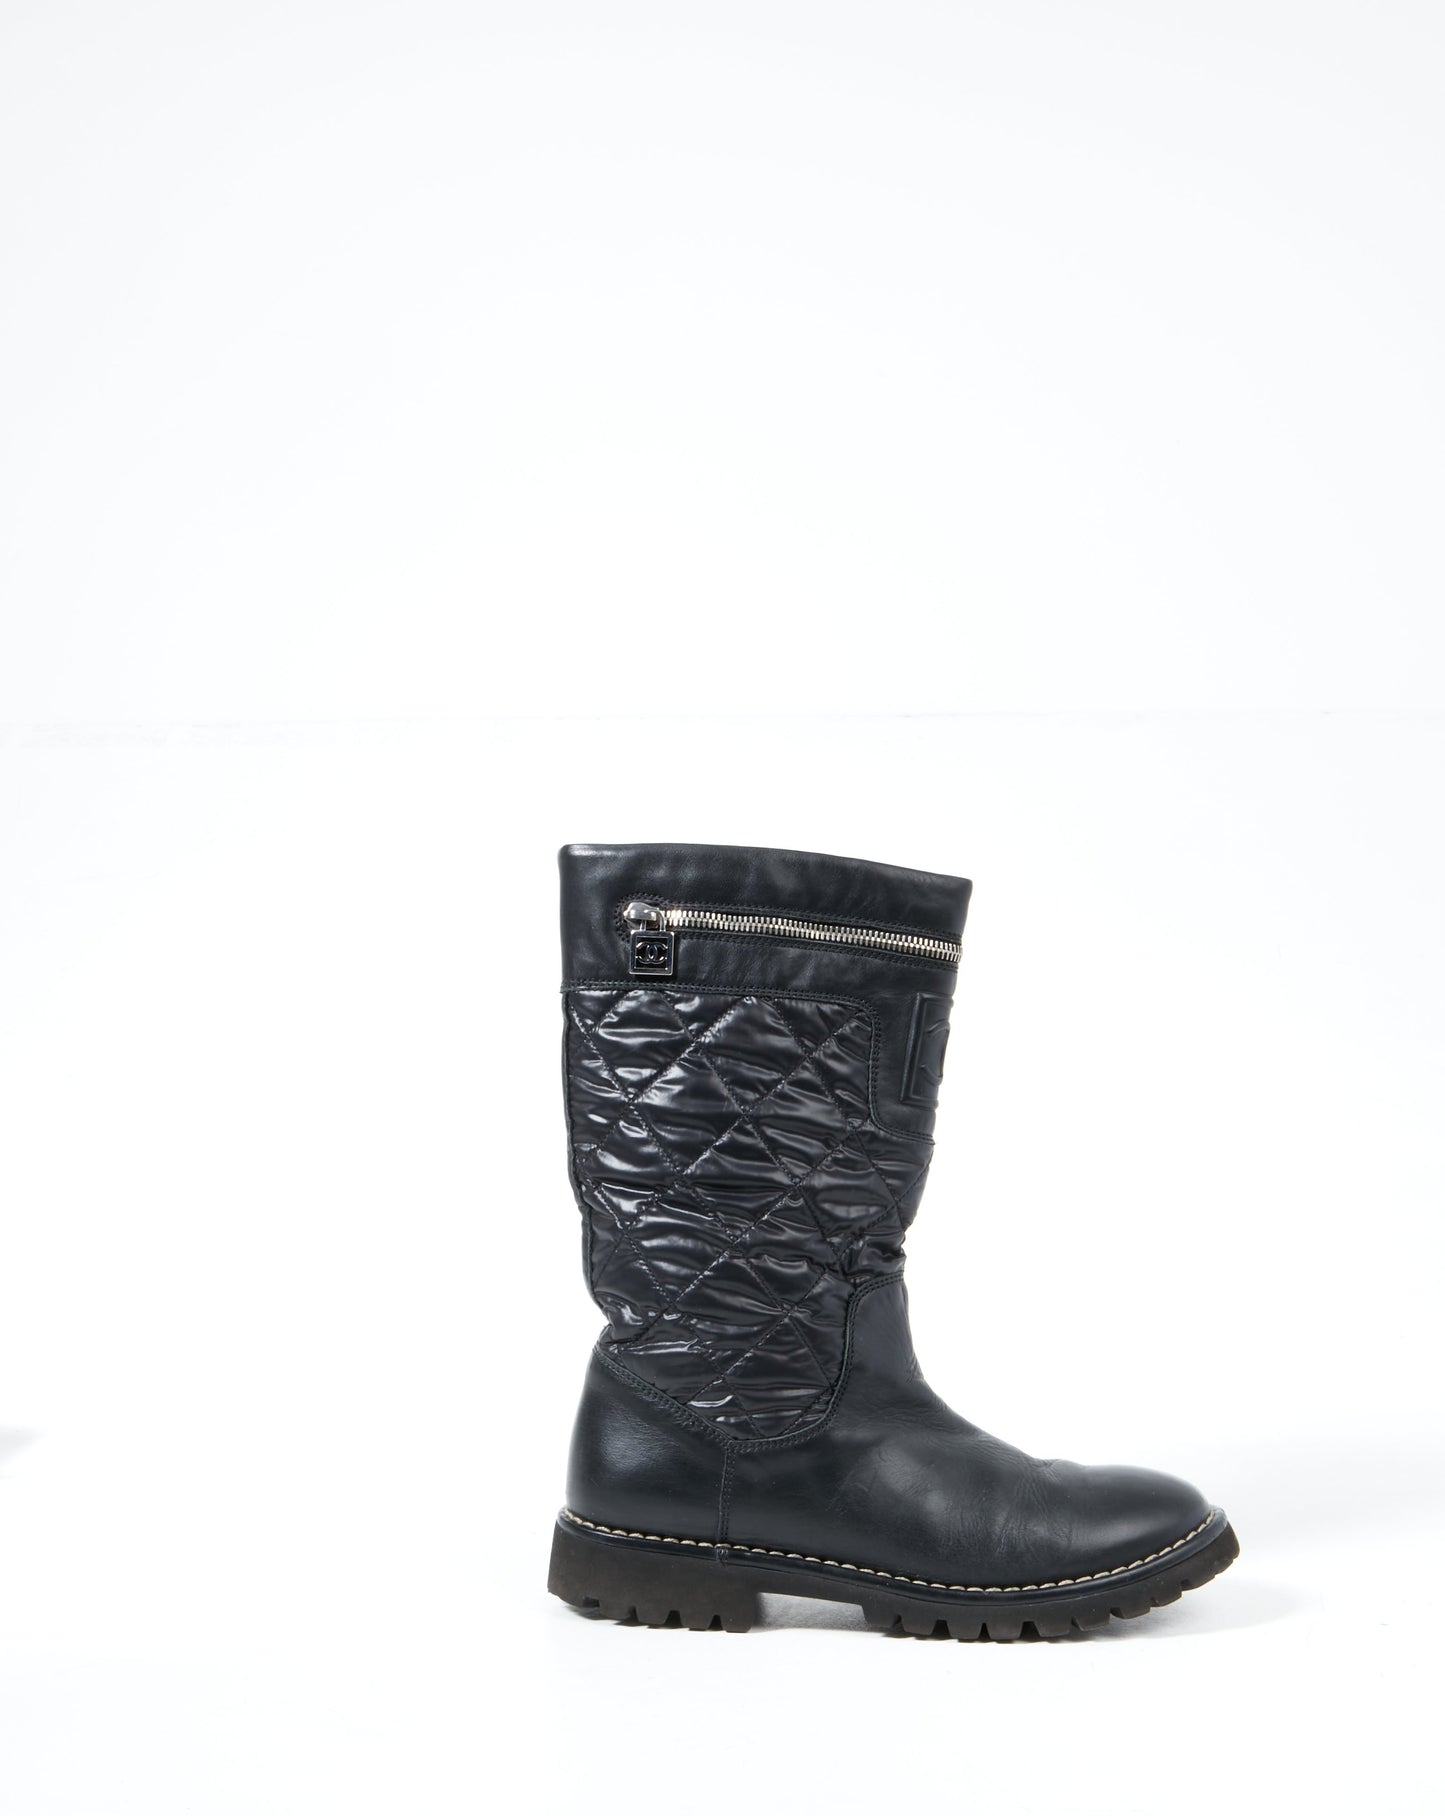 Chanel Black Nylon/Leather Coco Cocoon Boots - 38